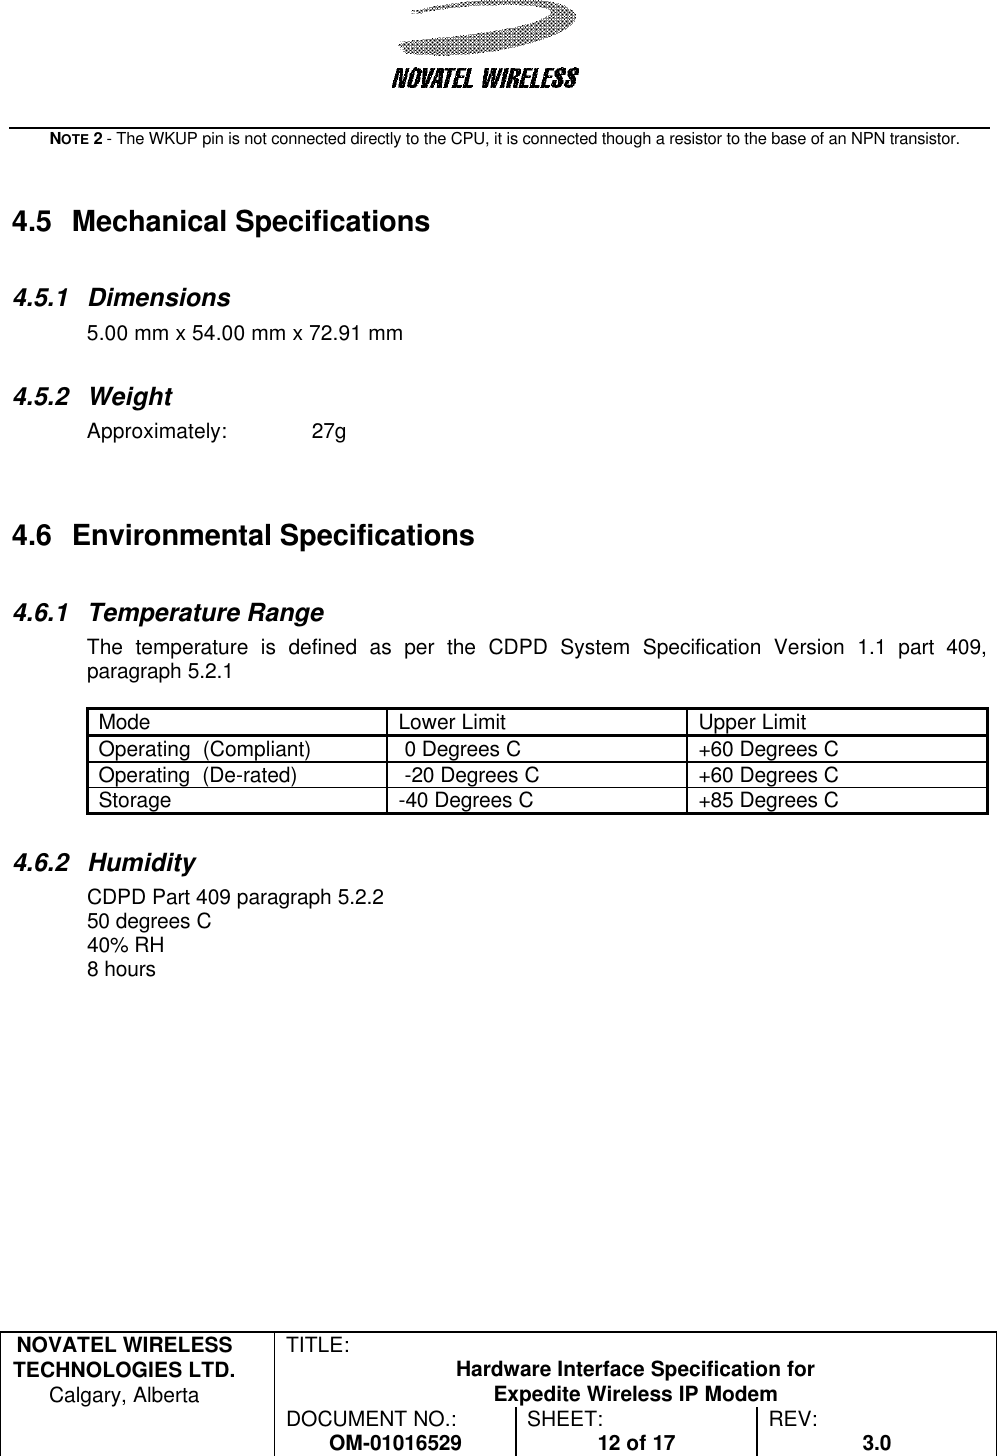   NOVATEL WIRELESS TECHNOLOGIES LTD.  Calgary, Alberta TITLE: Hardware Interface Specification for Expedite Wireless IP Modem  DOCUMENT NO.: OM-01016529 SHEET: 12 of 17 REV: 3.0   NOTE 2 - The WKUP pin is not connected directly to the CPU, it is connected though a resistor to the base of an NPN transistor.   4.5 Mechanical Specifications  4.5.1 Dimensions 5.00 mm x 54.00 mm x 72.91 mm   4.5.2 Weight Approximately:  27g    4.6 Environmental Specifications  4.6.1 Temperature Range The temperature is defined as per the CDPD System Specification Version 1.1 part 409, paragraph 5.2.1  Mode Lower Limit Upper Limit Operating  (Compliant)  0 Degrees C +60 Degrees C Operating  (De-rated)  -20 Degrees C +60 Degrees C Storage -40 Degrees C +85 Degrees C  4.6.2 Humidity CDPD Part 409 paragraph 5.2.2 50 degrees C 40% RH 8 hours  